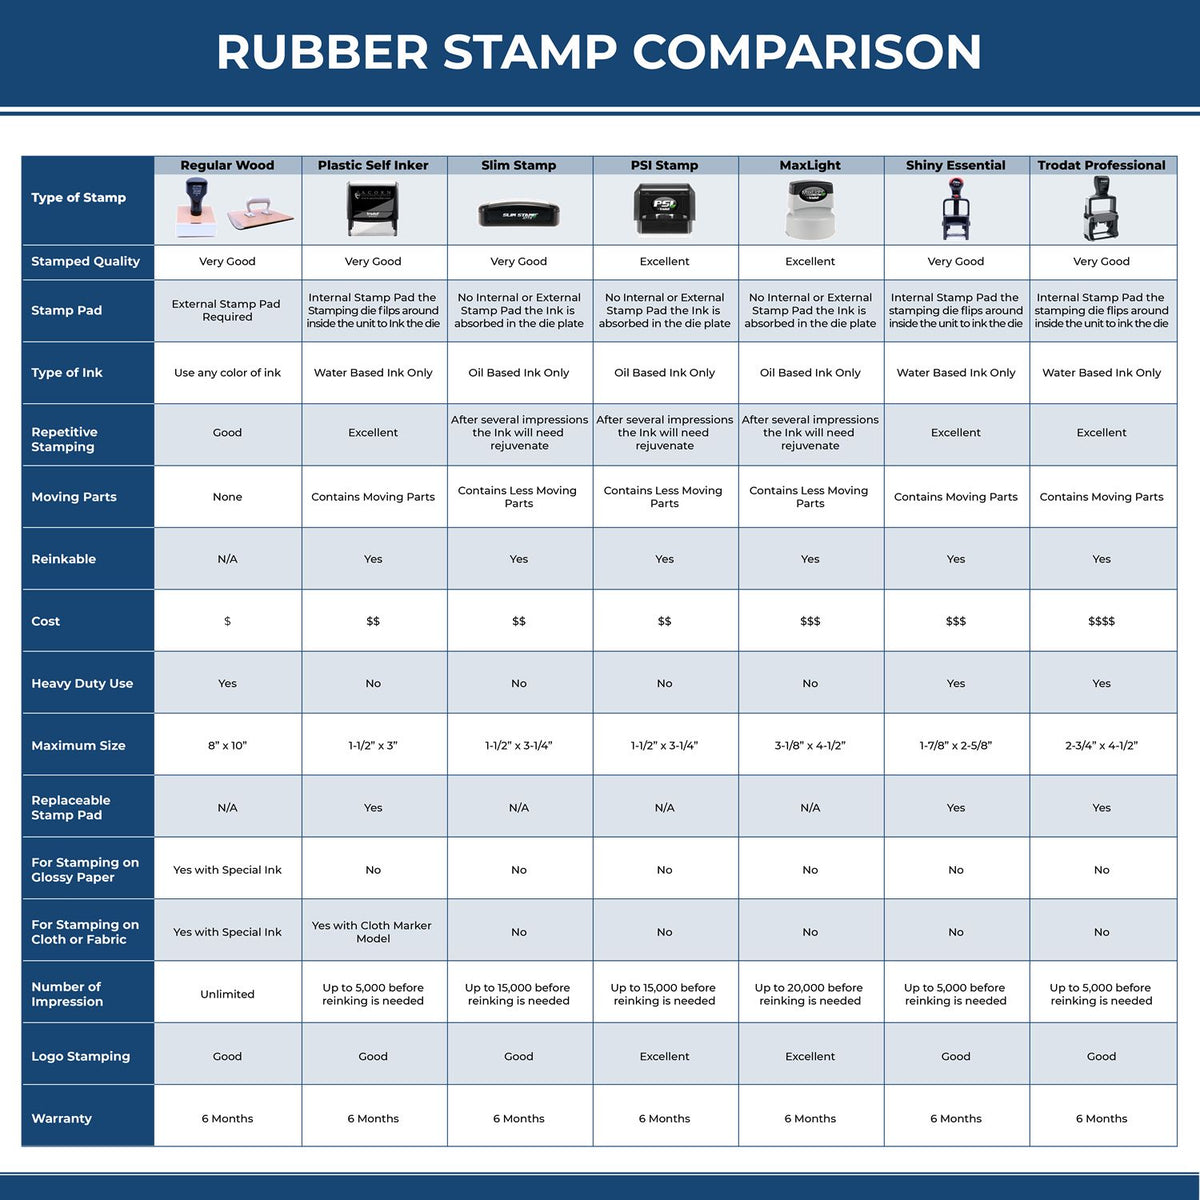 Large Faxed Rubber Stamp 4126R Rubber Stamp Comparison